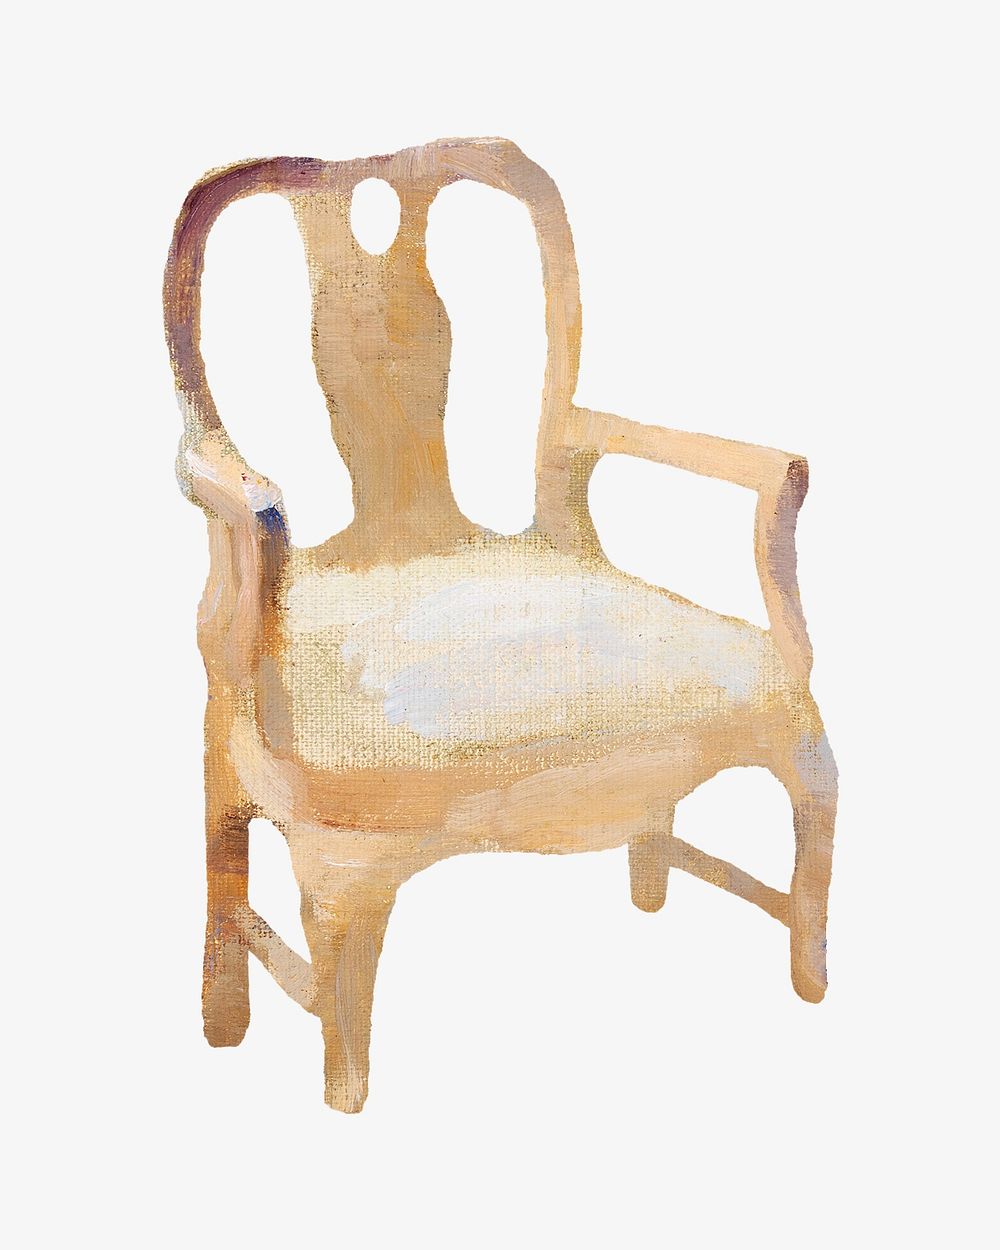 Vintage chair illustration by Maria Wiik. Remixed by rawpixel.